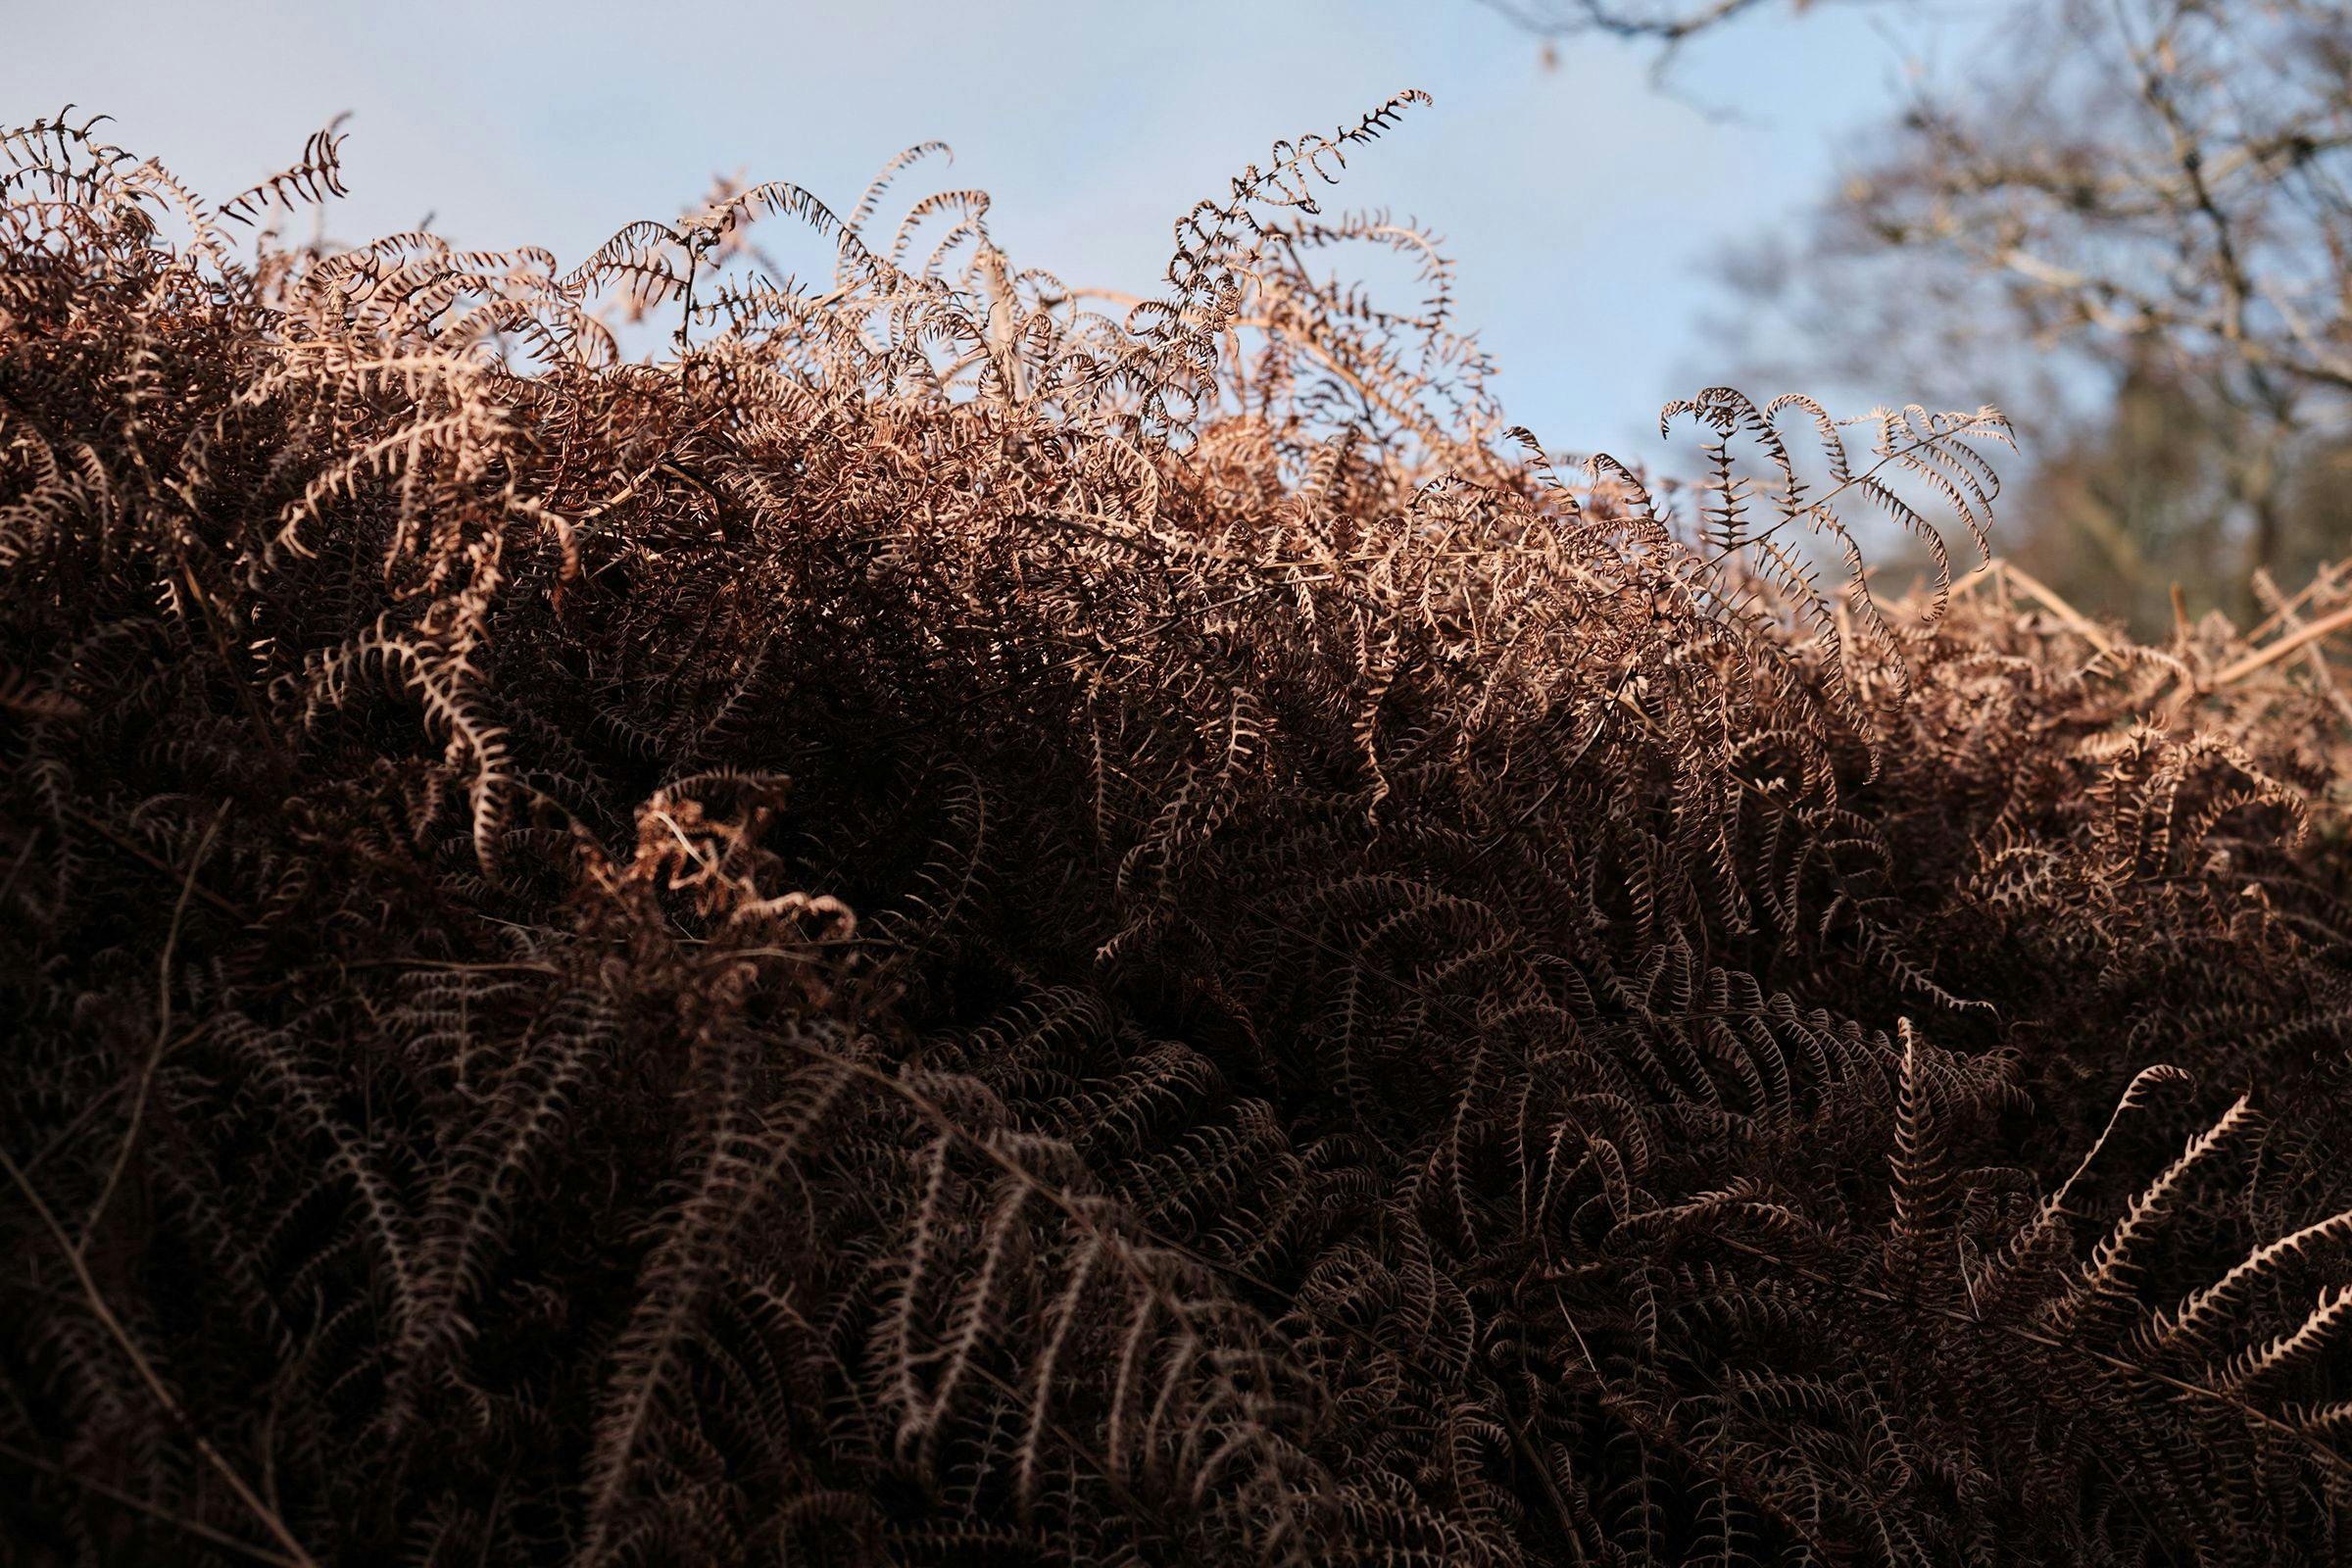 The sun glancing over the winter ferns, that have dried and gone golden from green 